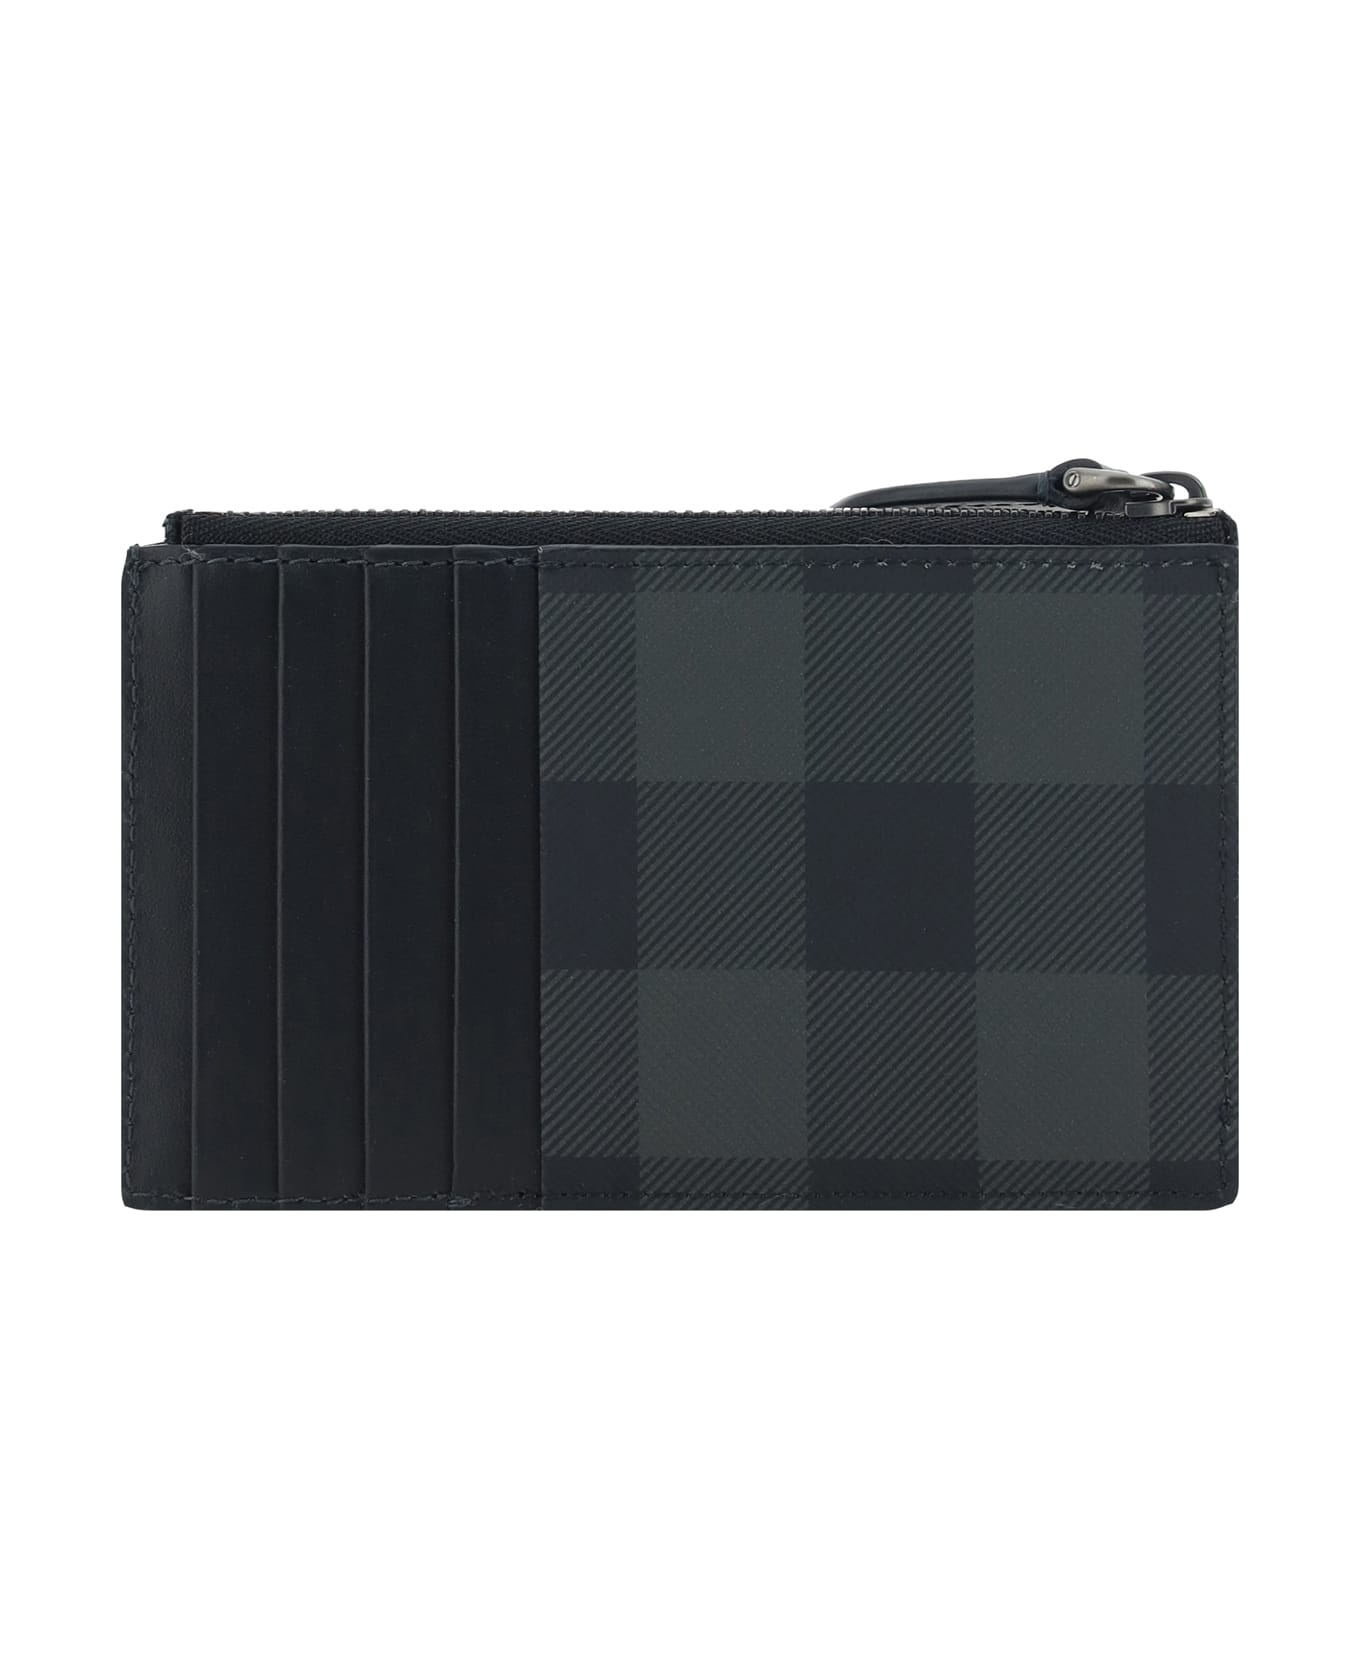 Burberry Coin Purse - Charcoal